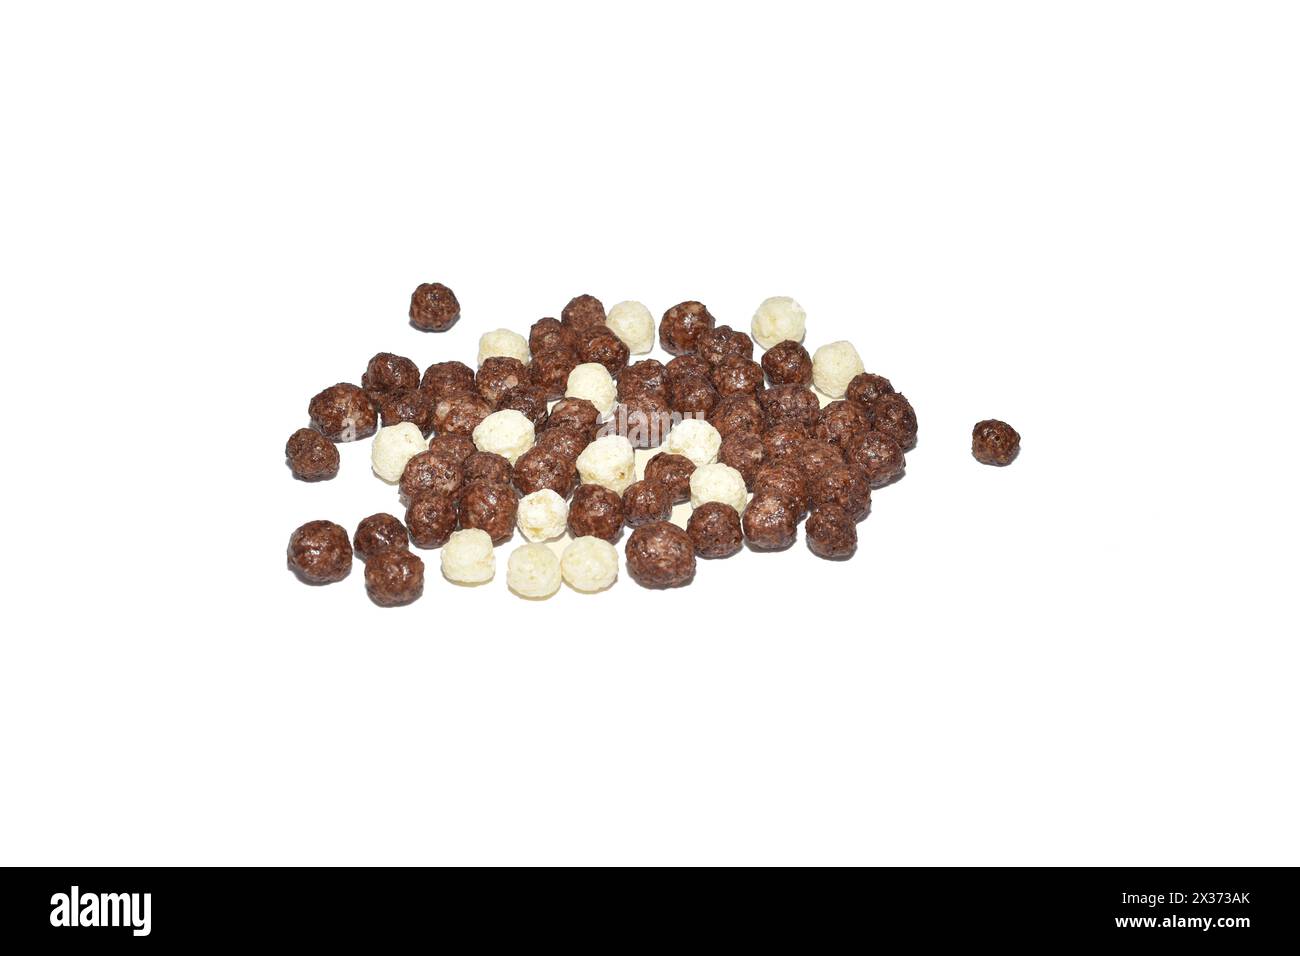 Corn balls with chocolate and vanilla flavors are scattered on a white background for a hearty breakfast. Stock Photo